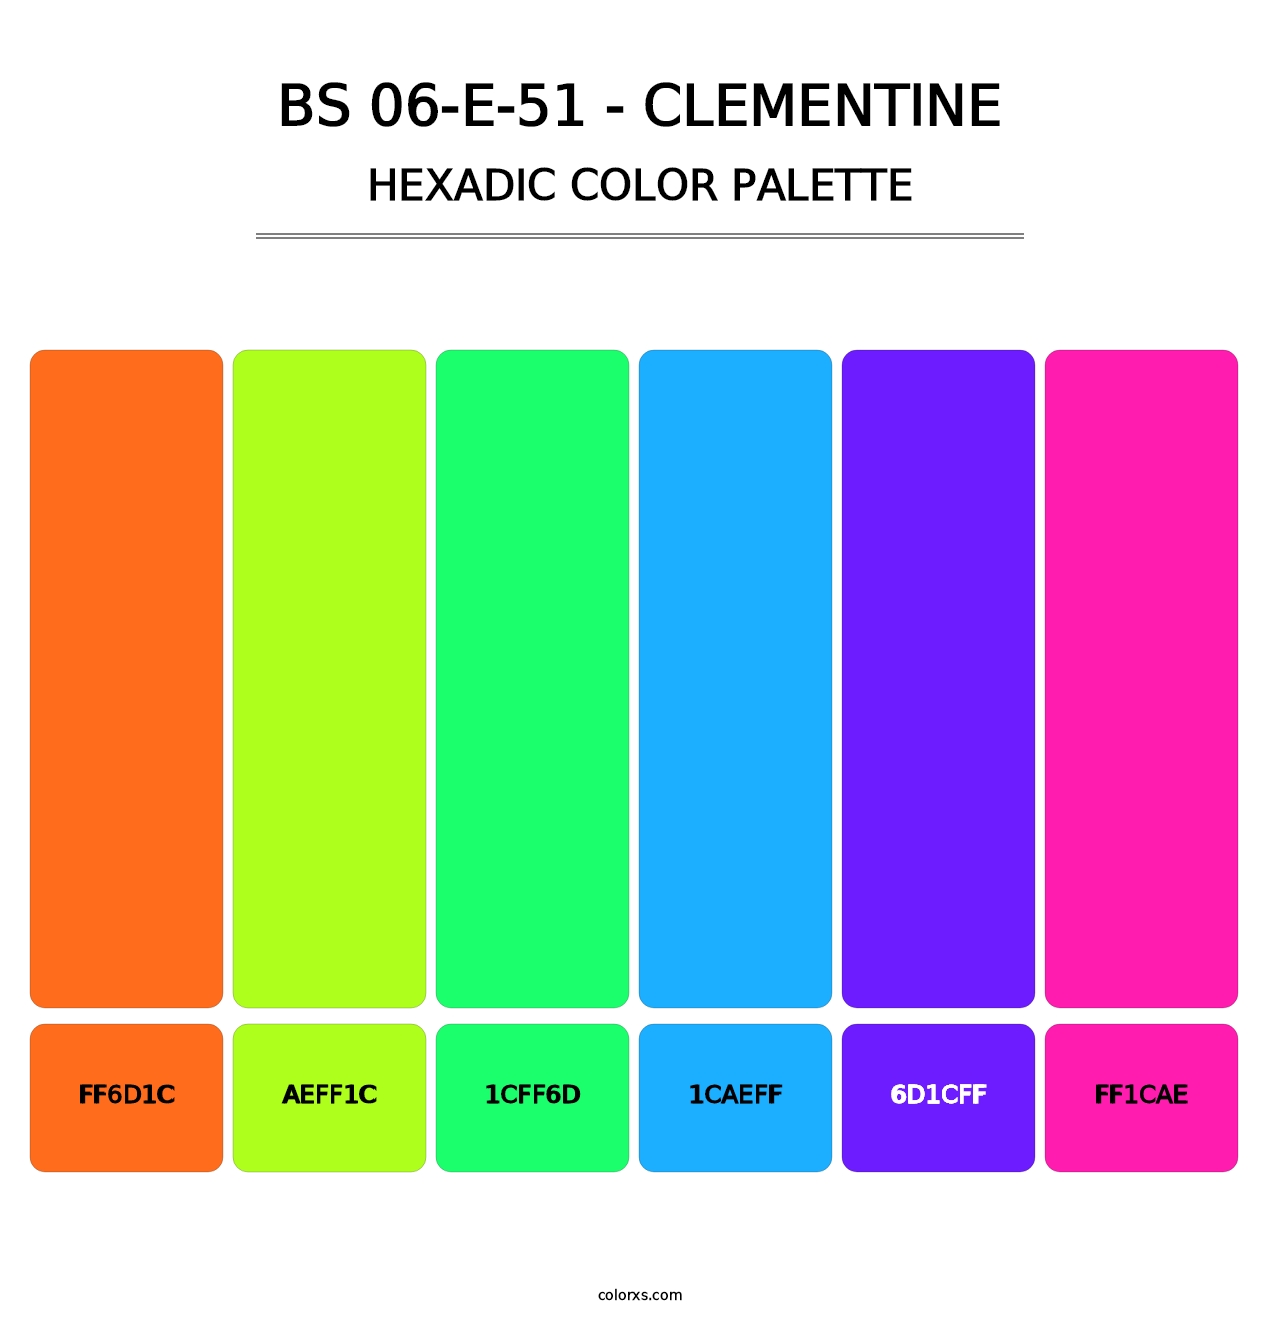 BS 06-E-51 - Clementine - Hexadic Color Palette